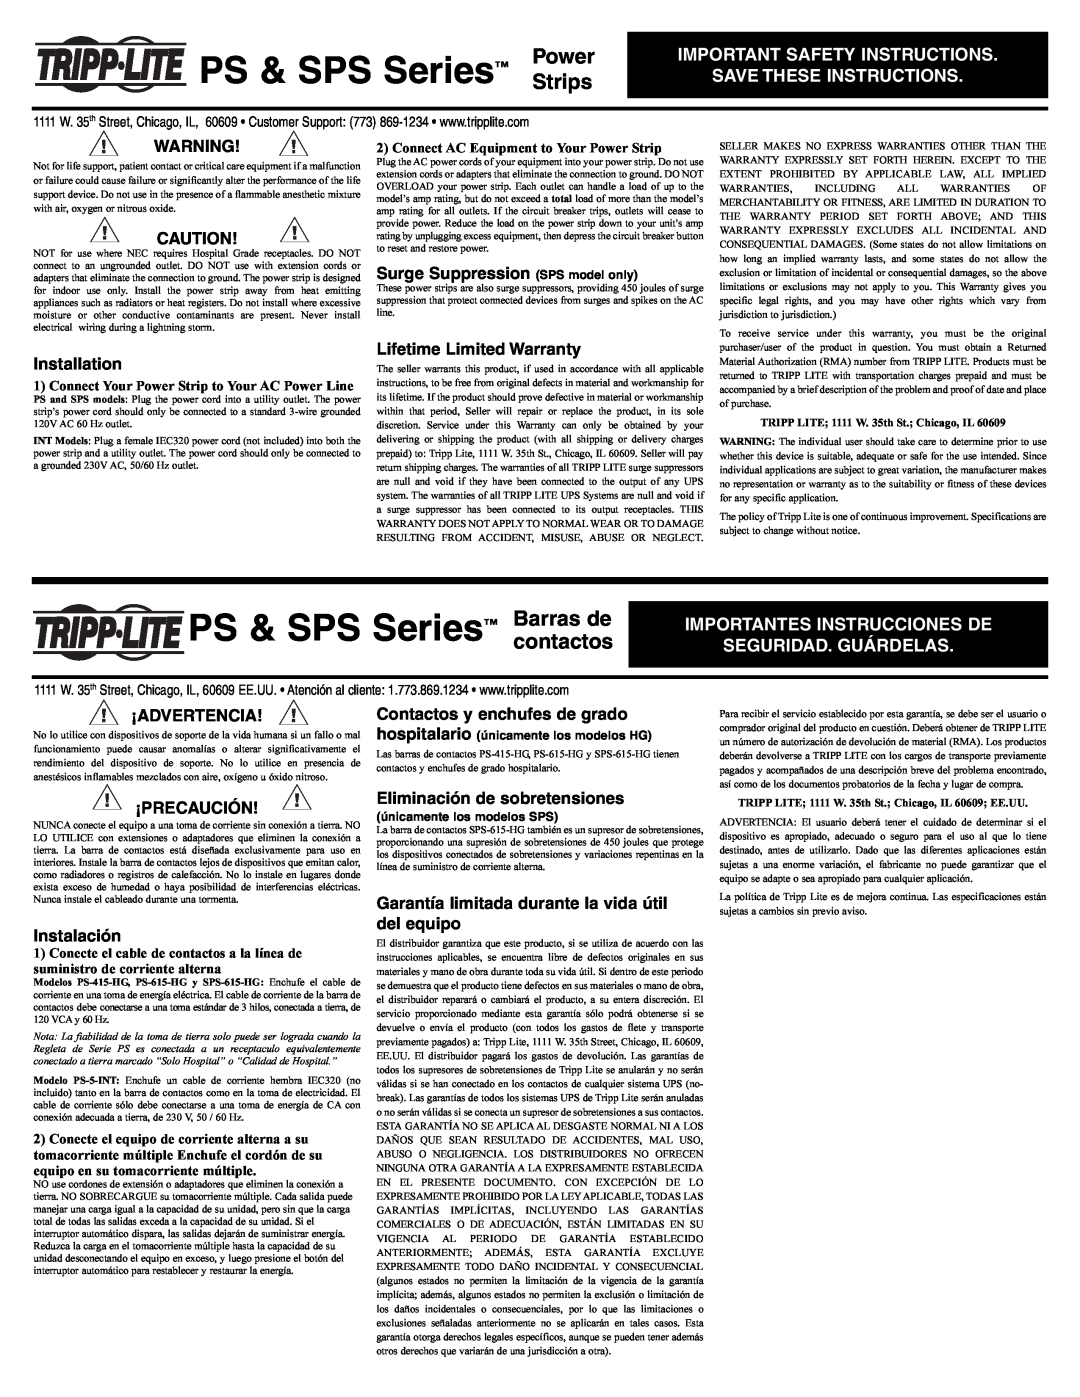 Tripp Lite 93-2216 important safety instructions Important Safety Instructions Save These Instructions, Installation 